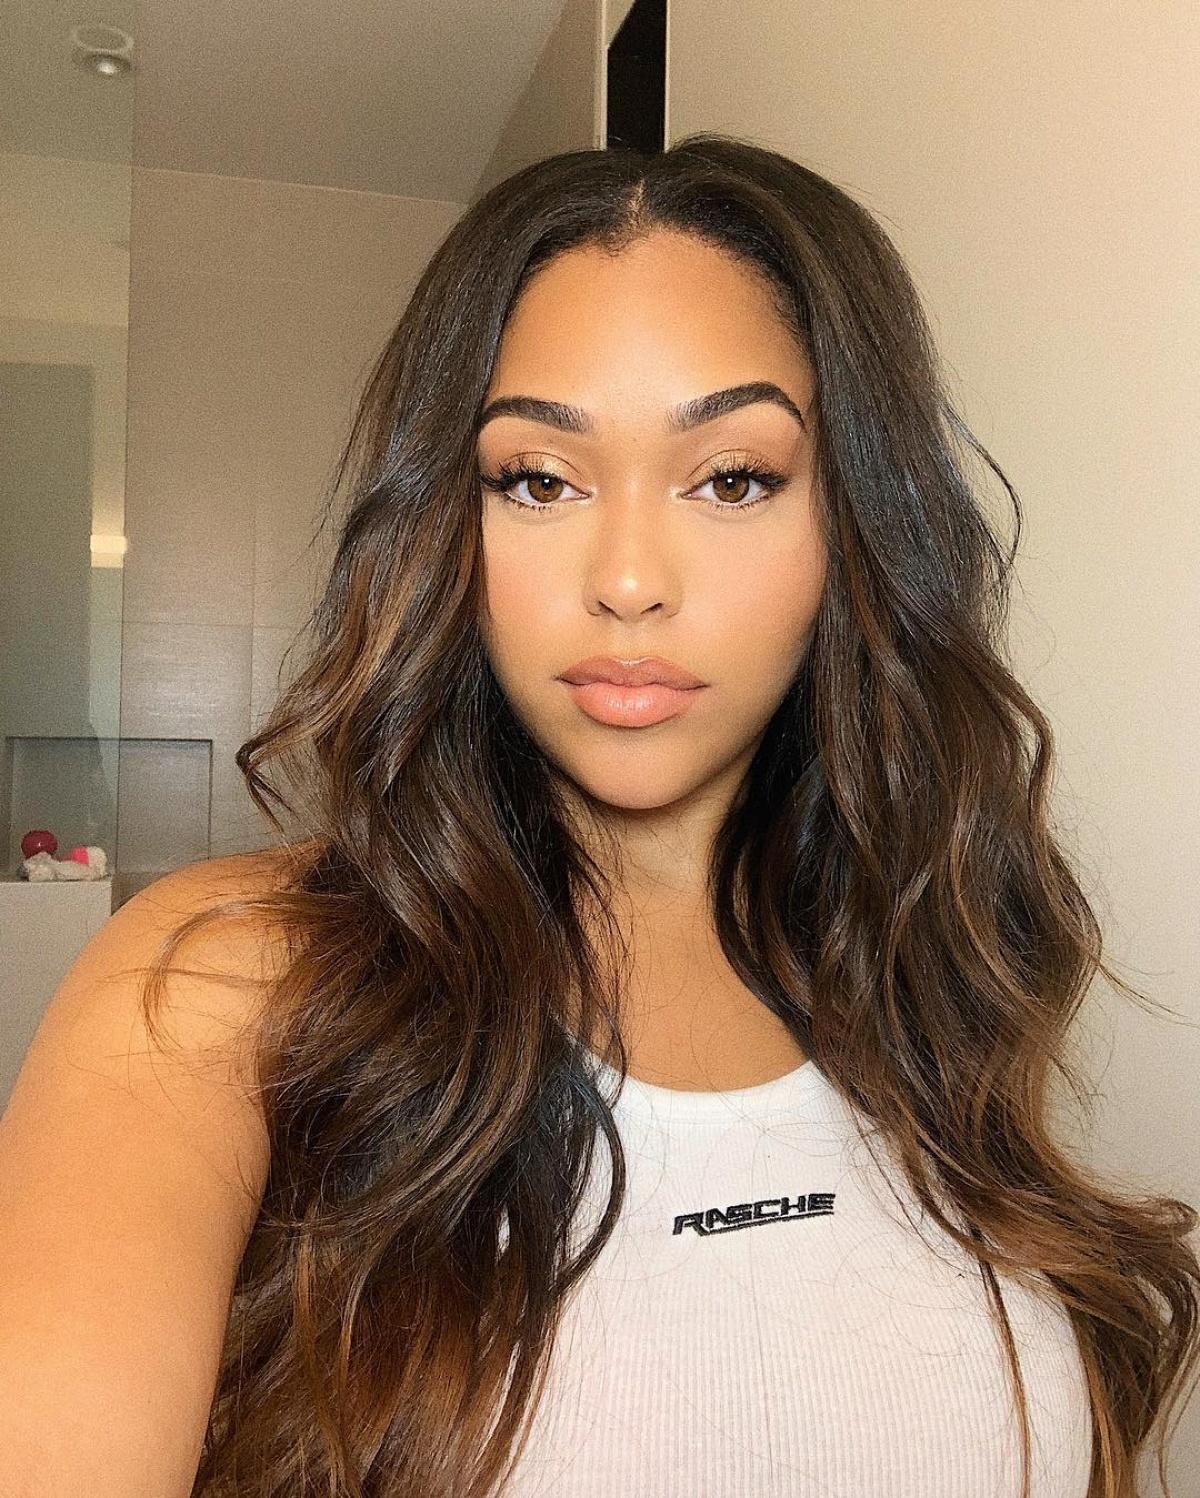 Jordyn Woods says Tristan Thompson kissed her - I was in shock